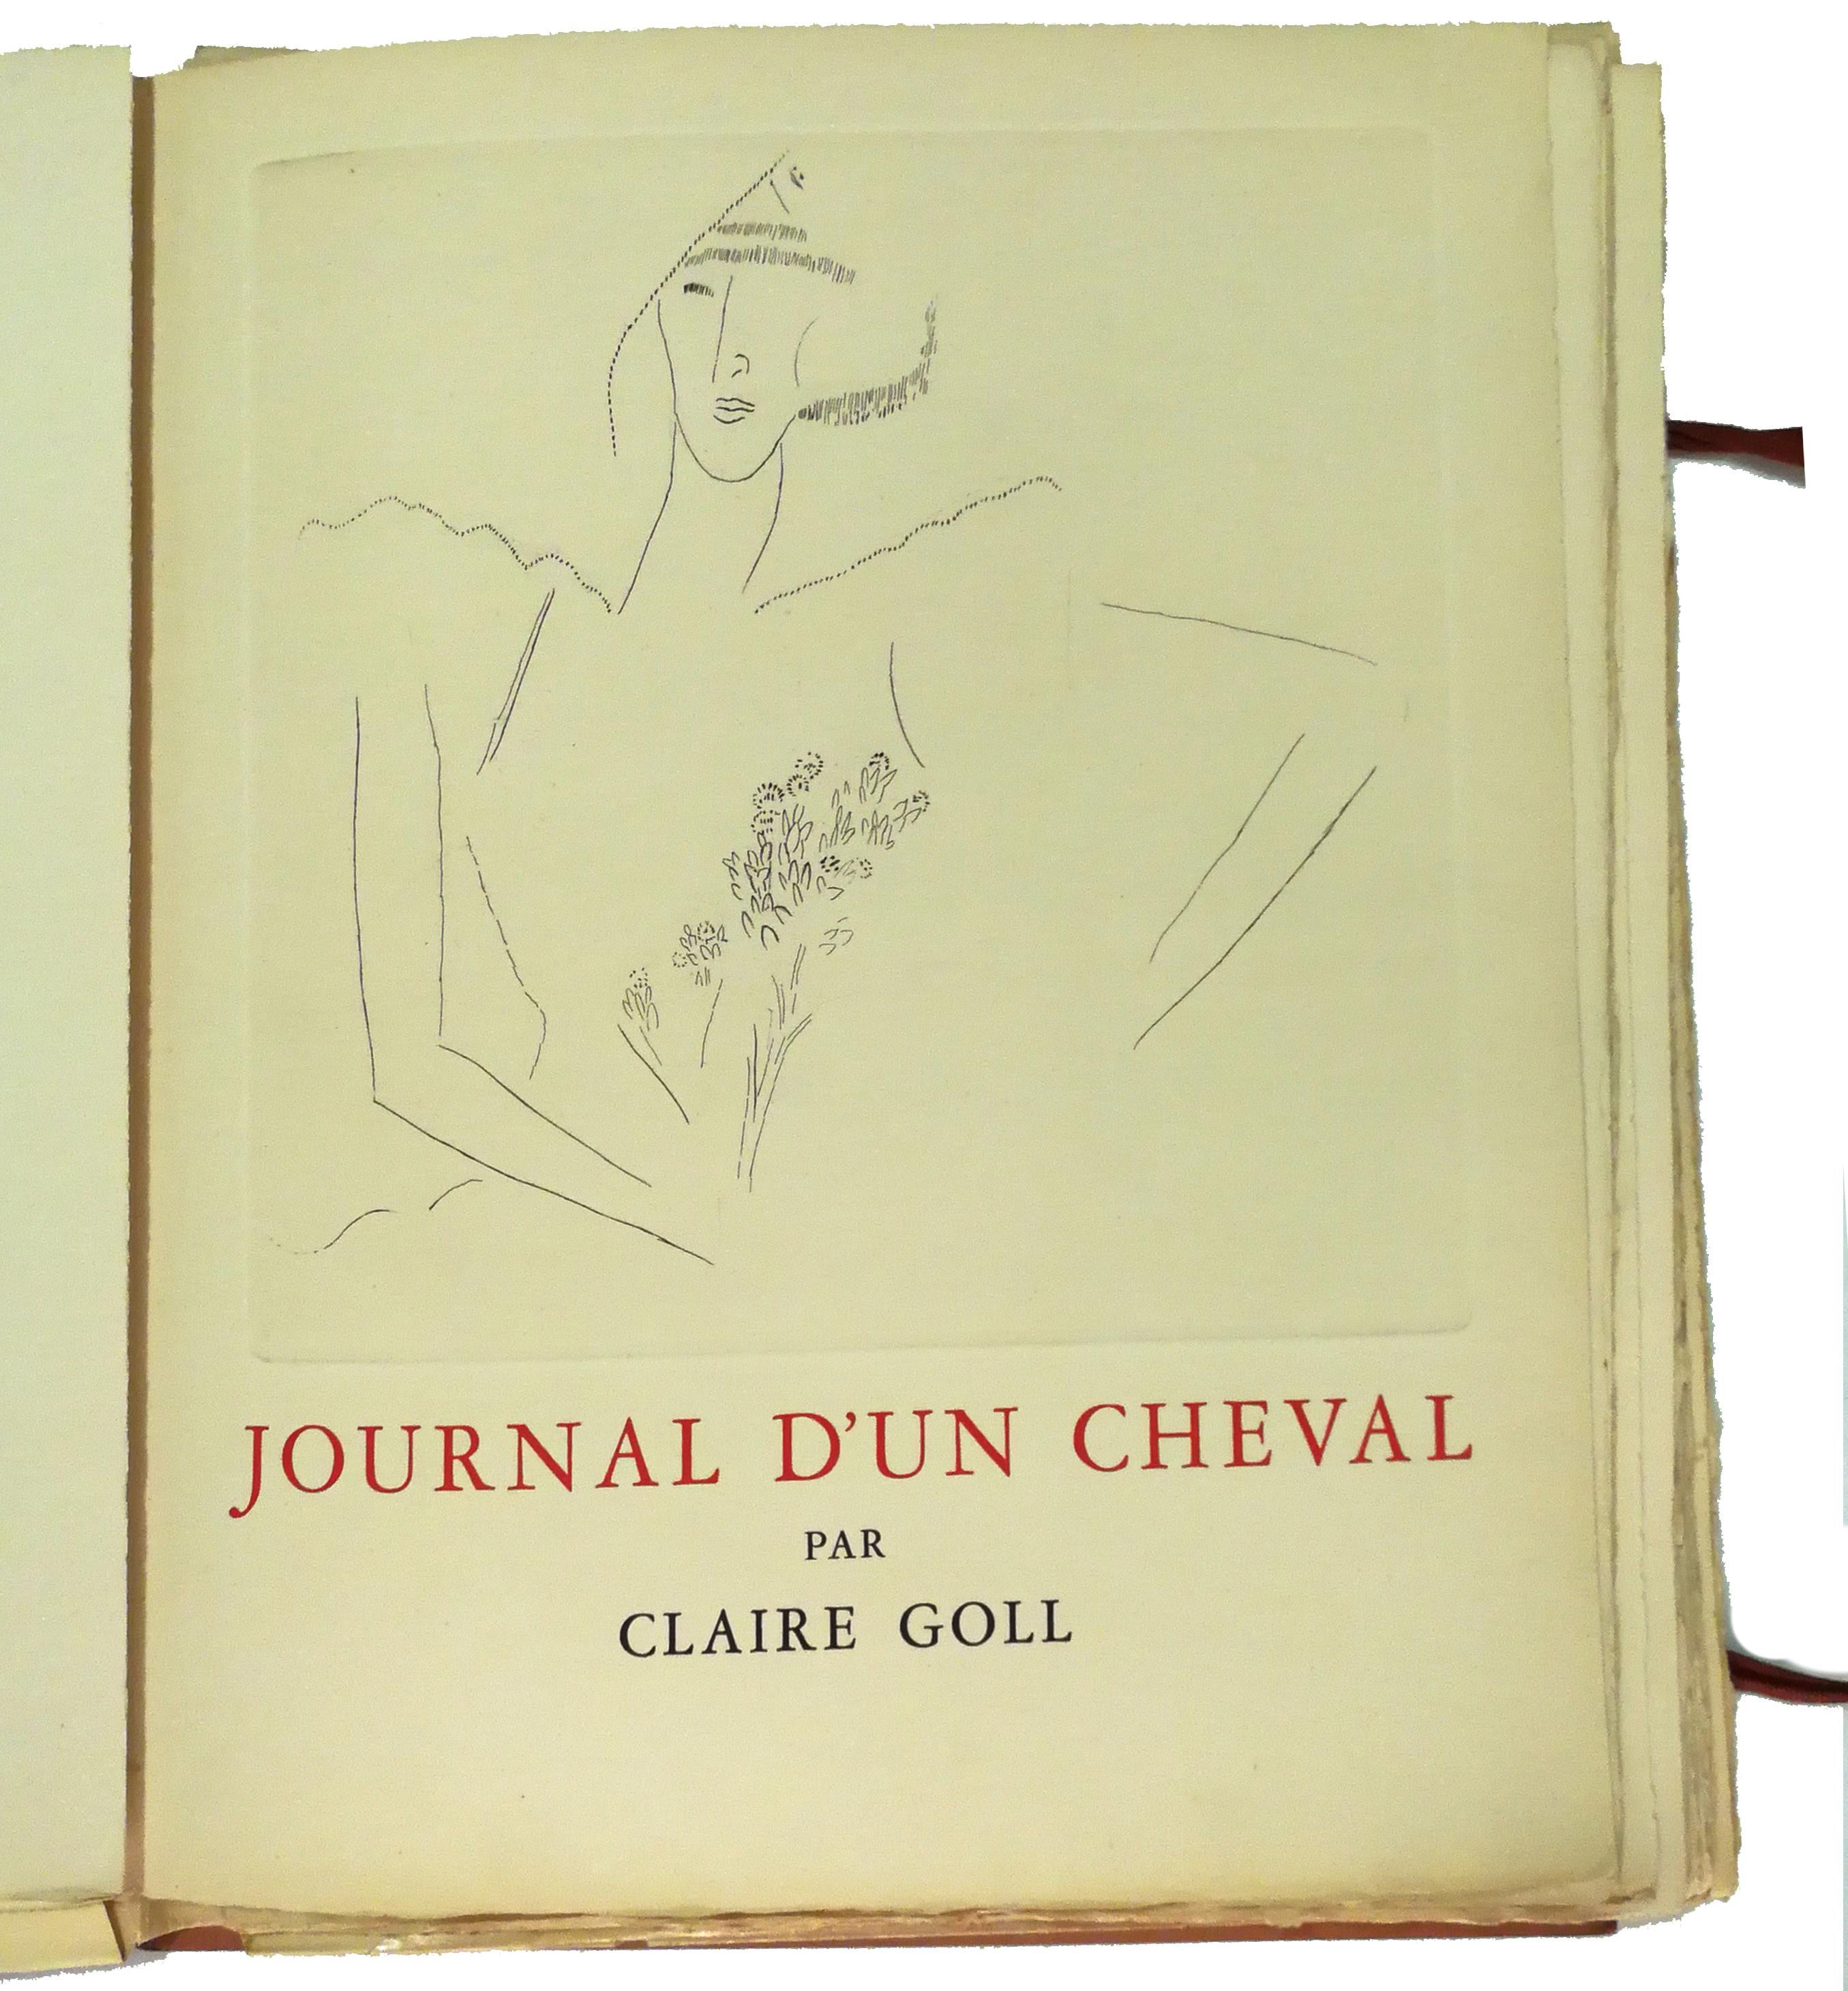 Journal d'un Cheval - Original Artist Book by C. Goll, illustrated by M. Chagall 2